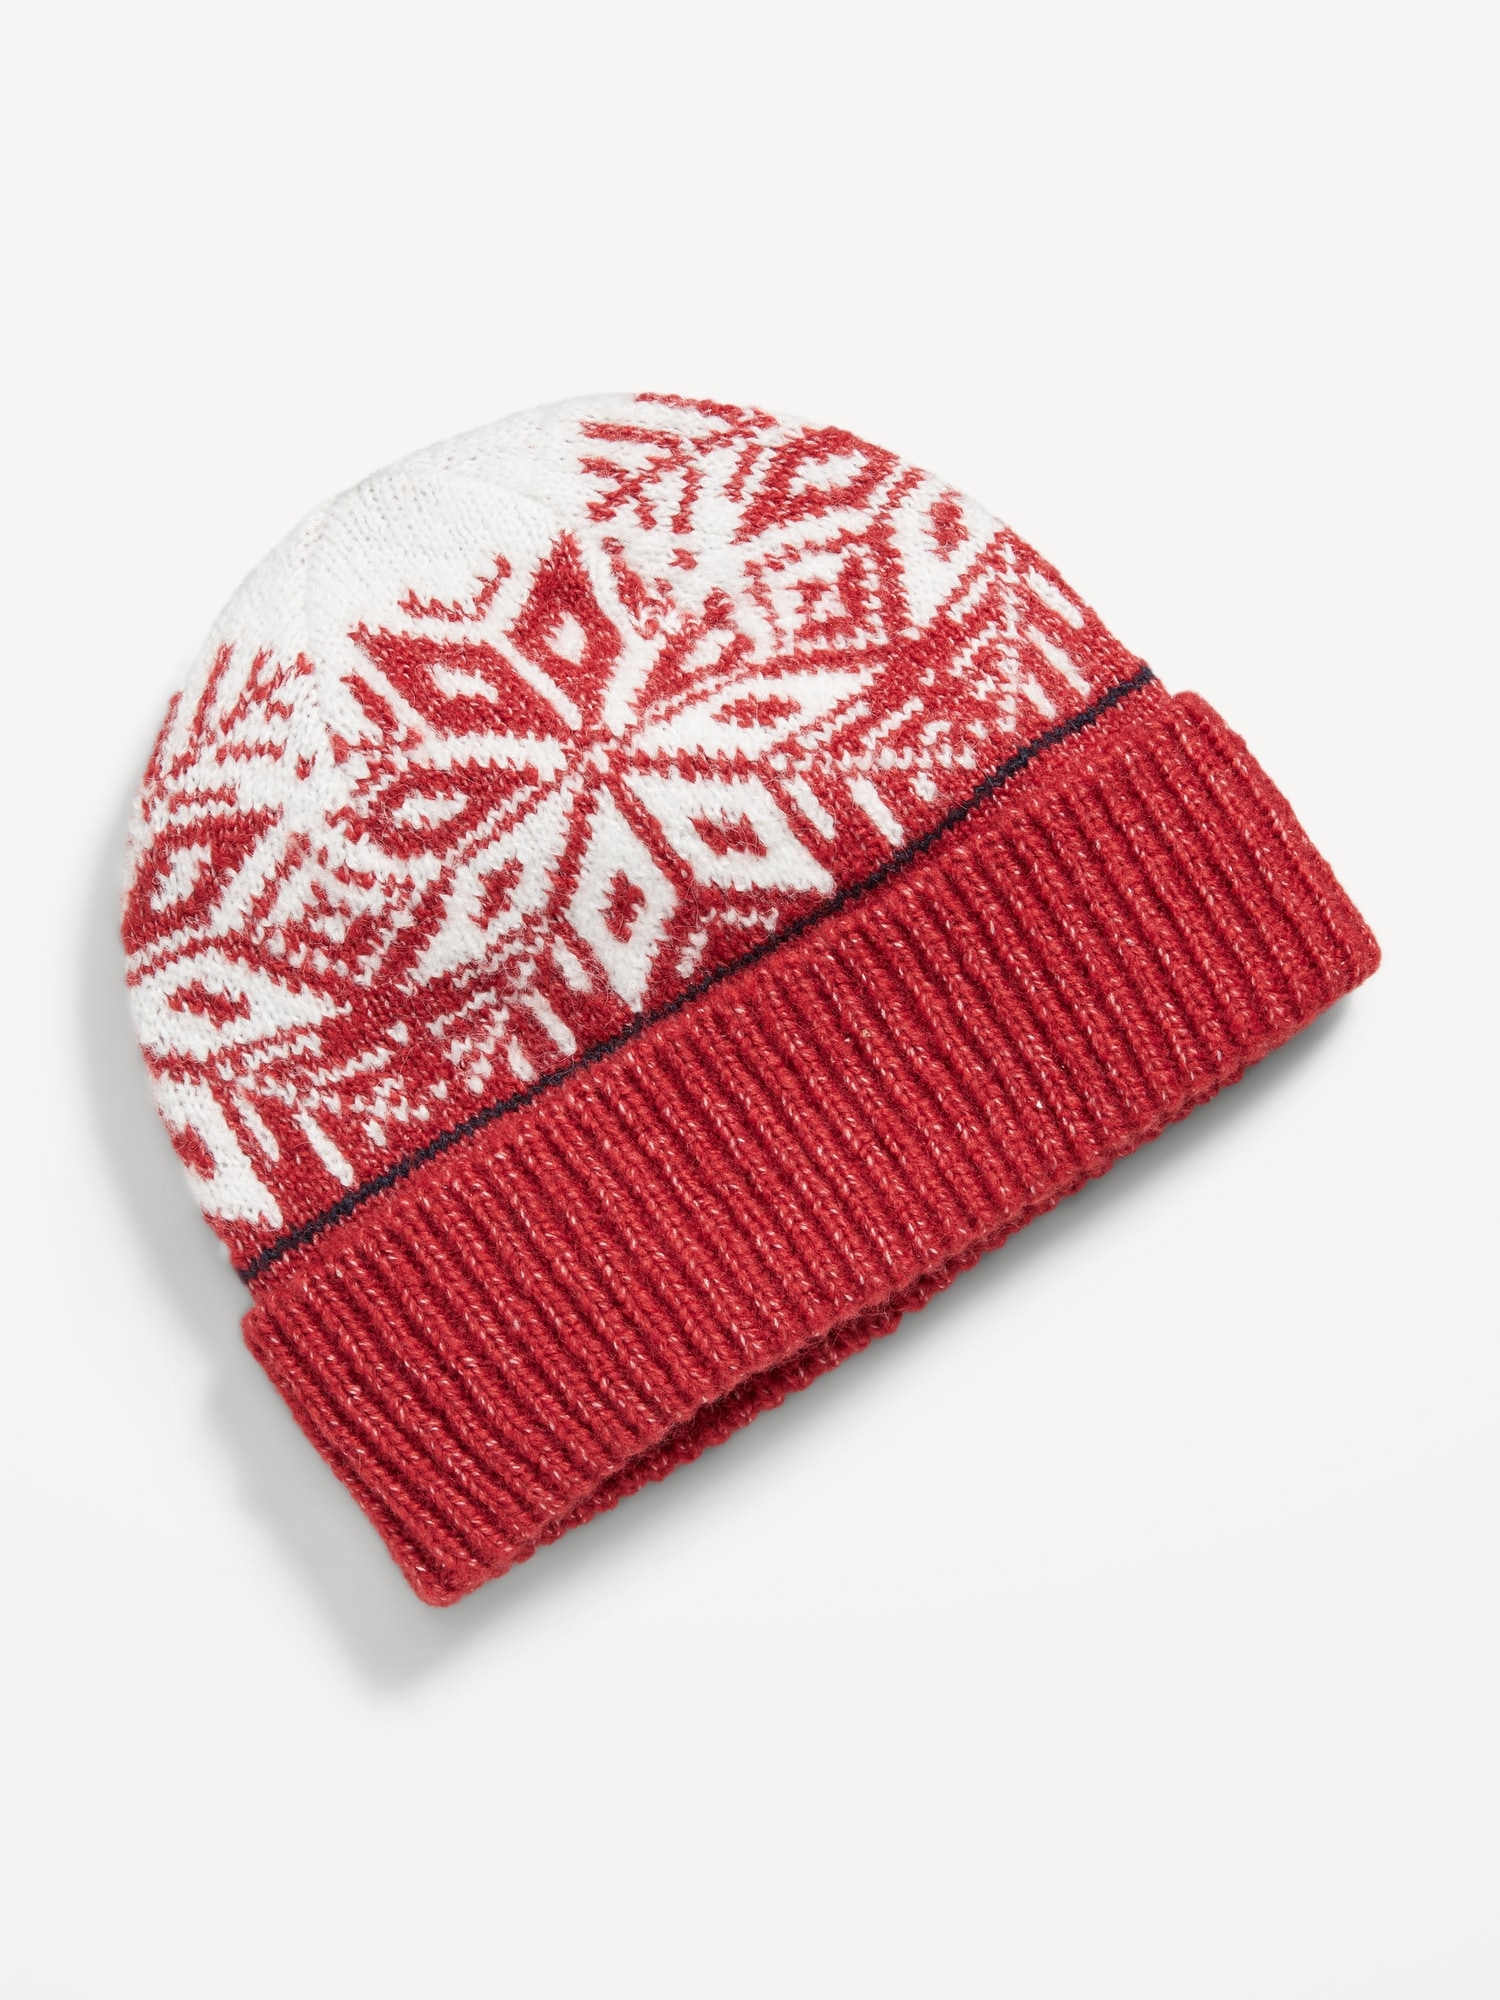 Winter Hats | Old Navy